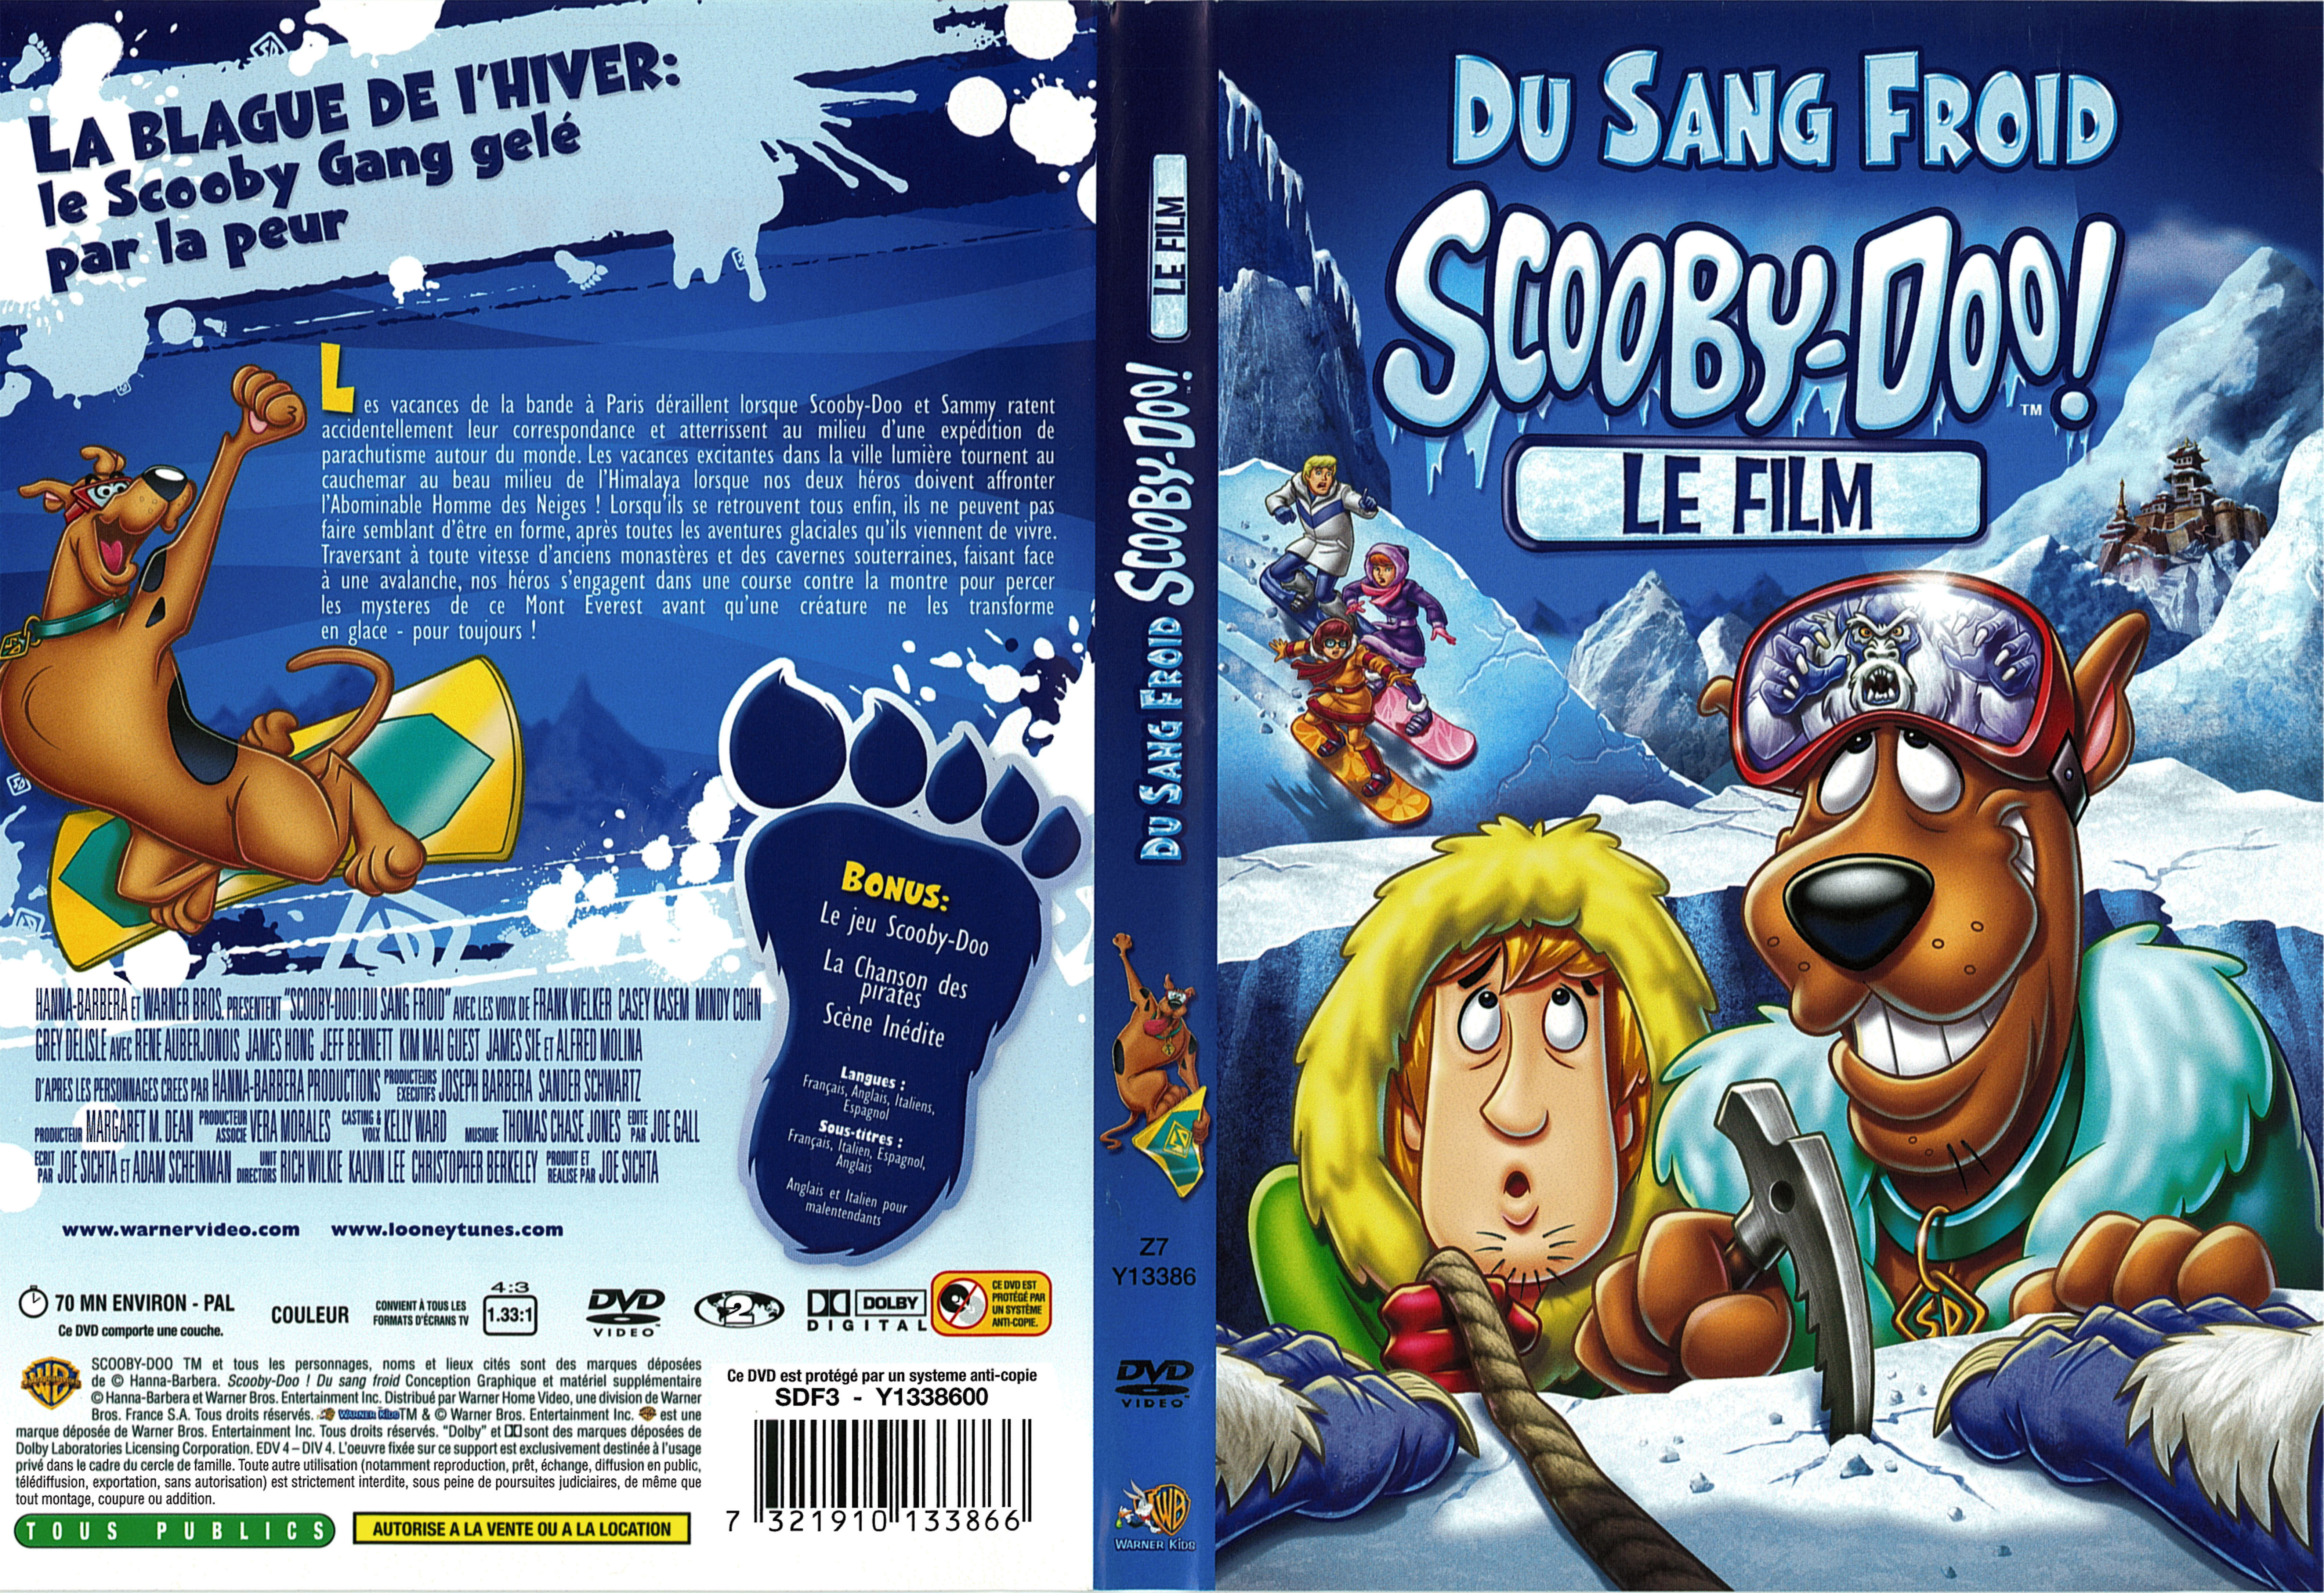 Jaquette DVD Du sang froid Scooby-Doo